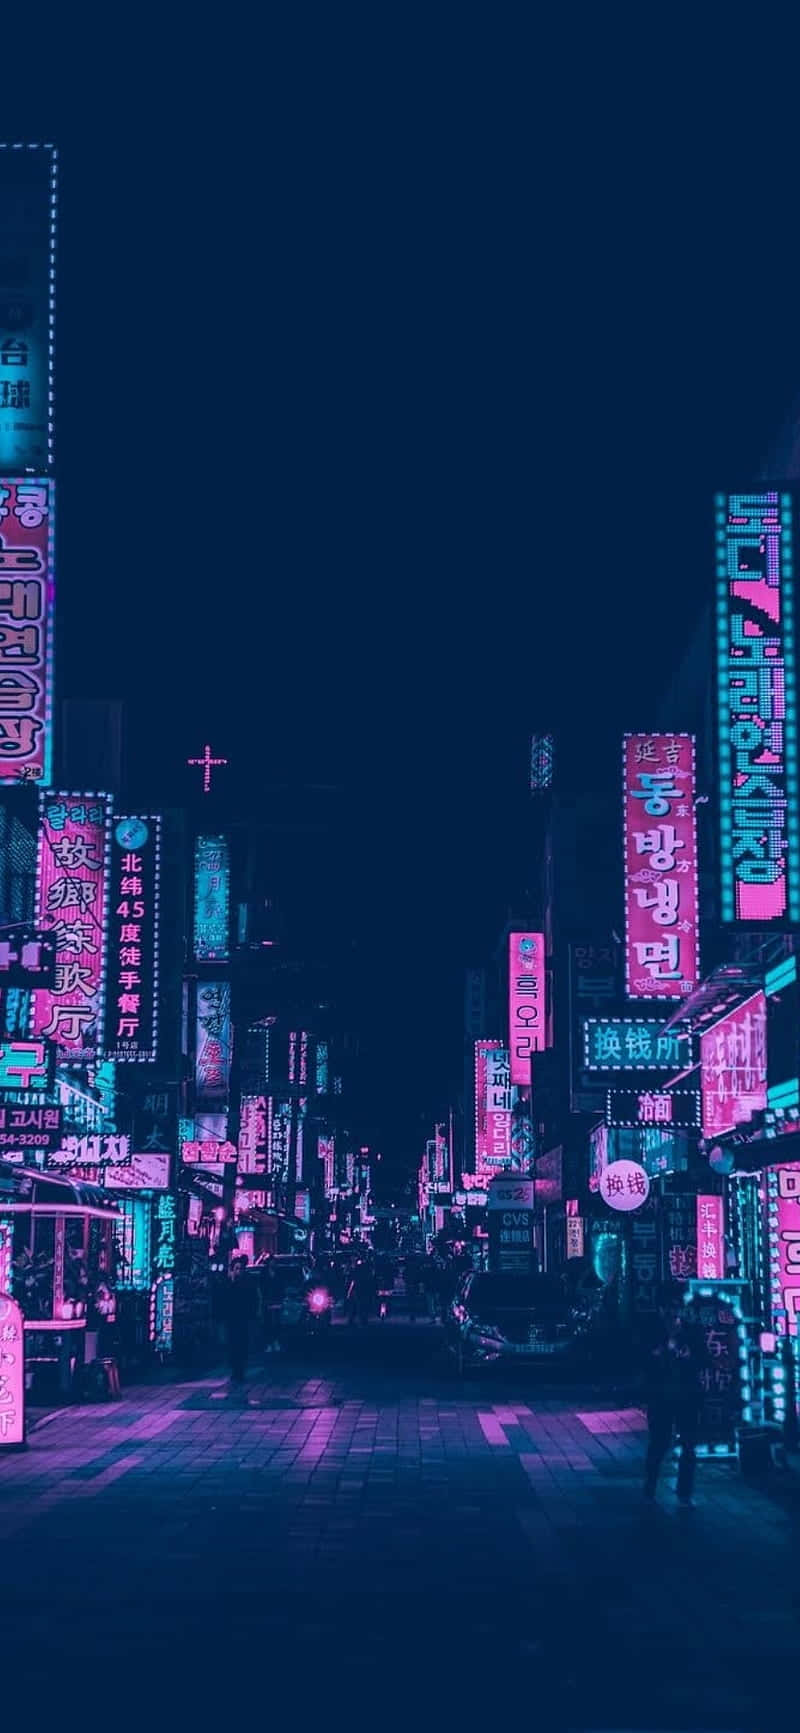 Bright lights and urban vibes in Neon City Wallpaper